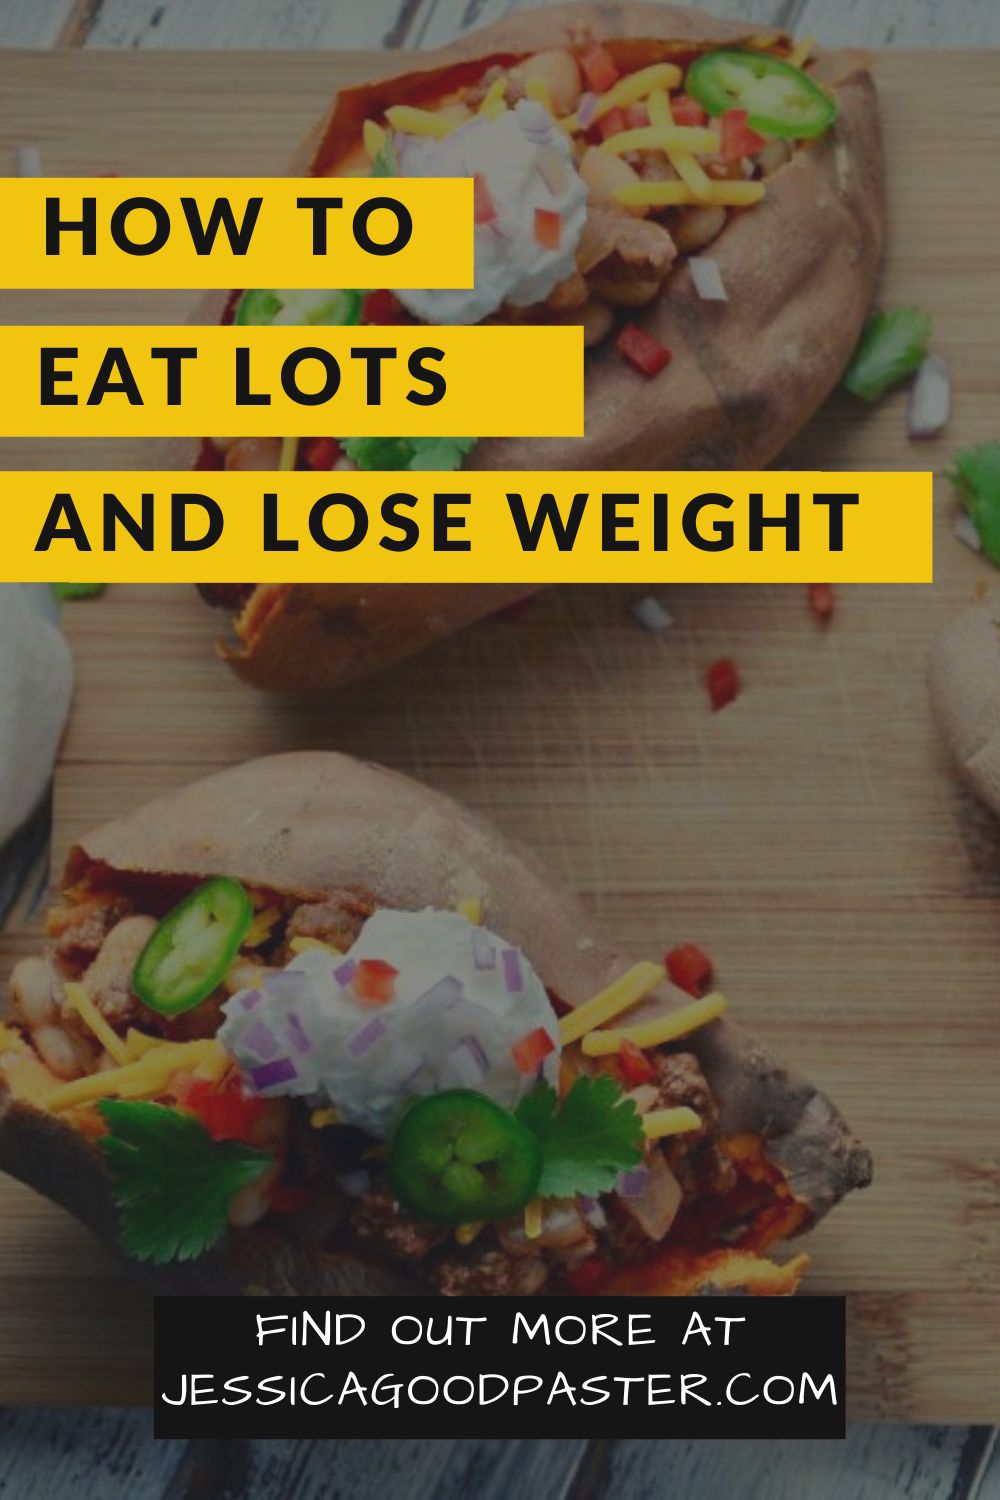 How to Eat Lots and Lose Weight | The new program Always Eat After 7 PM by Joel Marion lets you break traditional dieting rules by eating huge dinners, having daily dessert, and late-night snacks. Learn why this sustainable diet works for me. #AlwaysEatAfter7PM #diet #loseweight #healthy